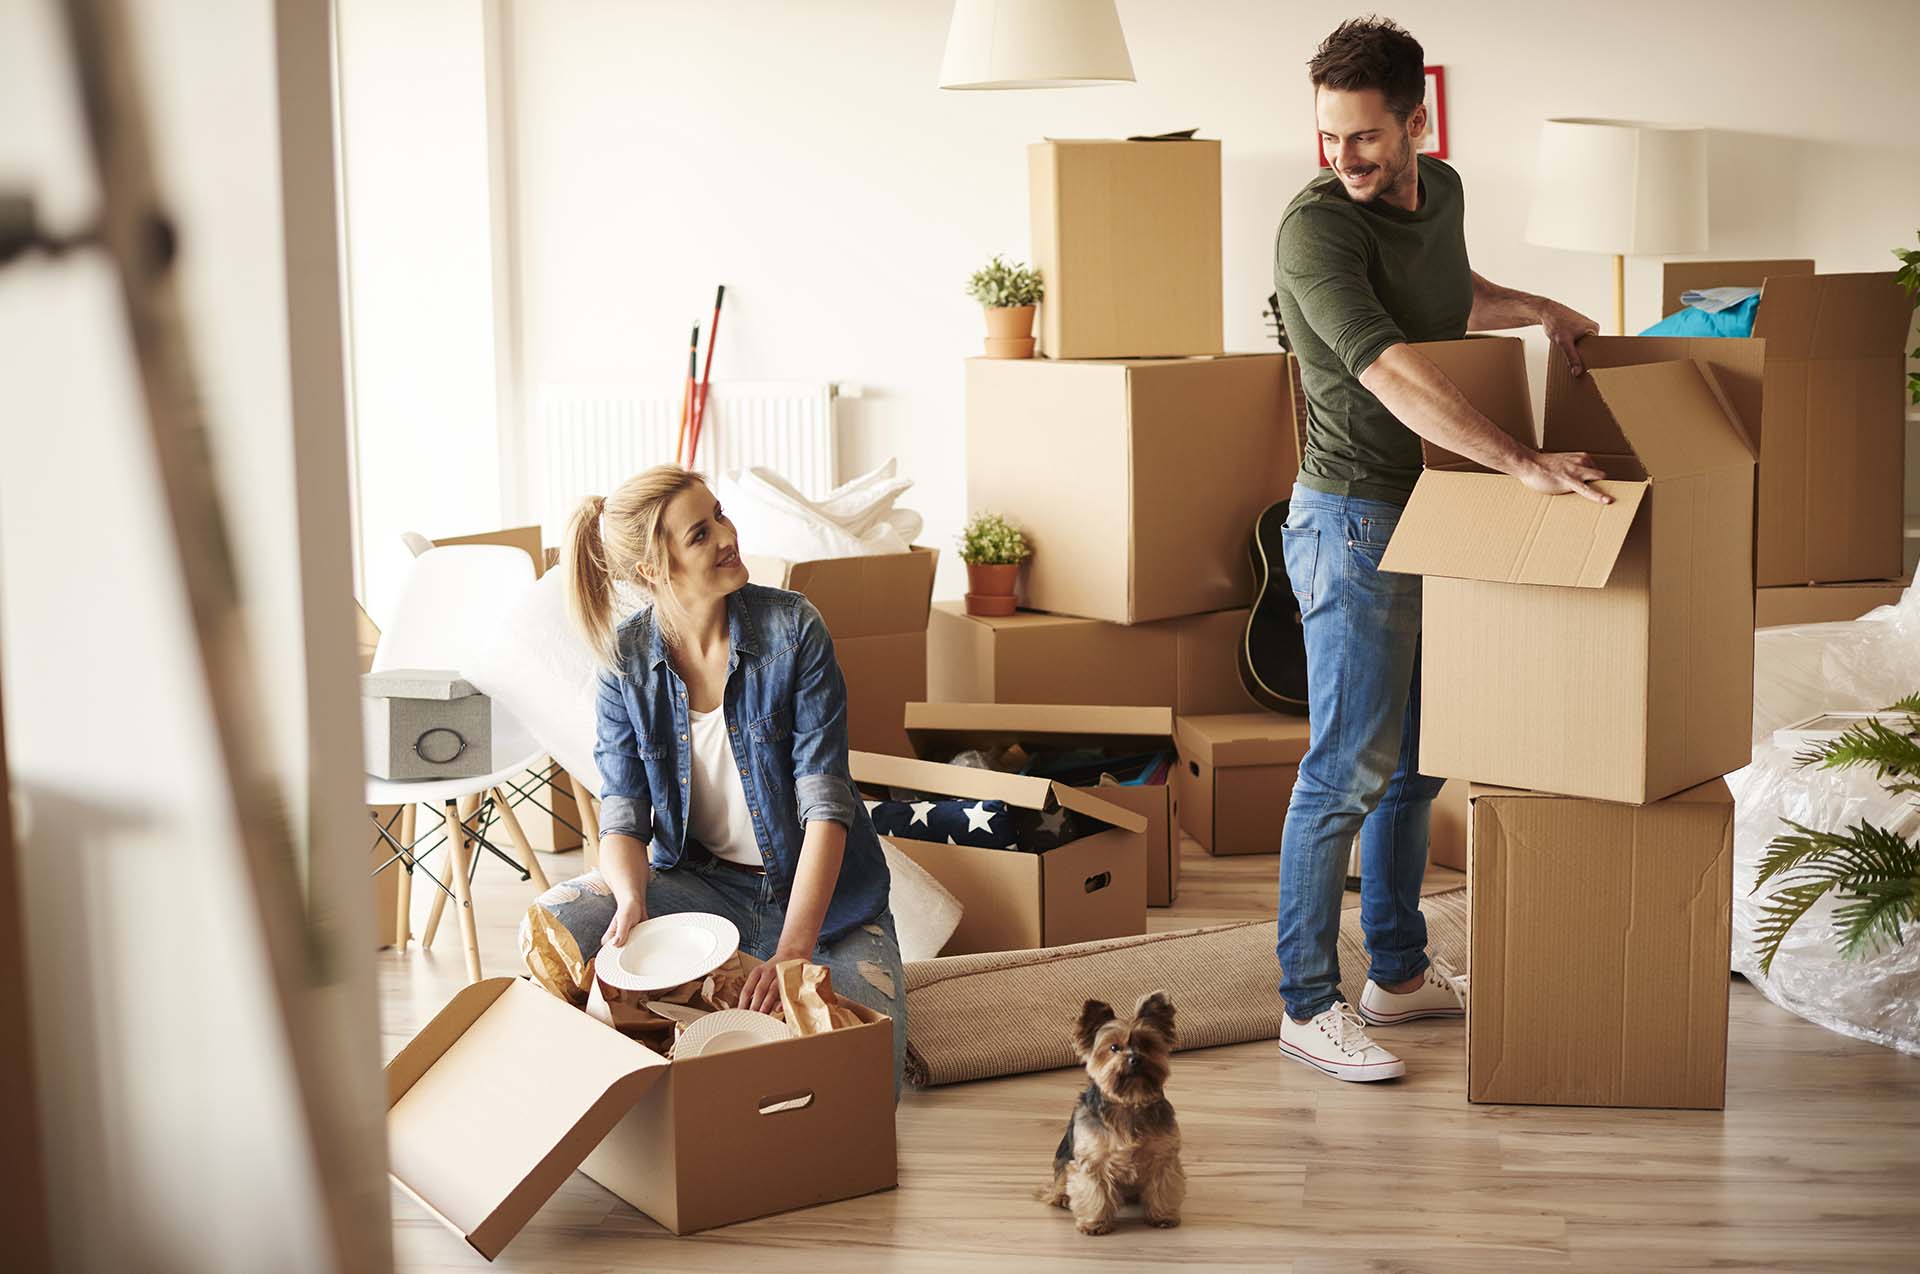 What is the best way to unpack moving boxes after moving?